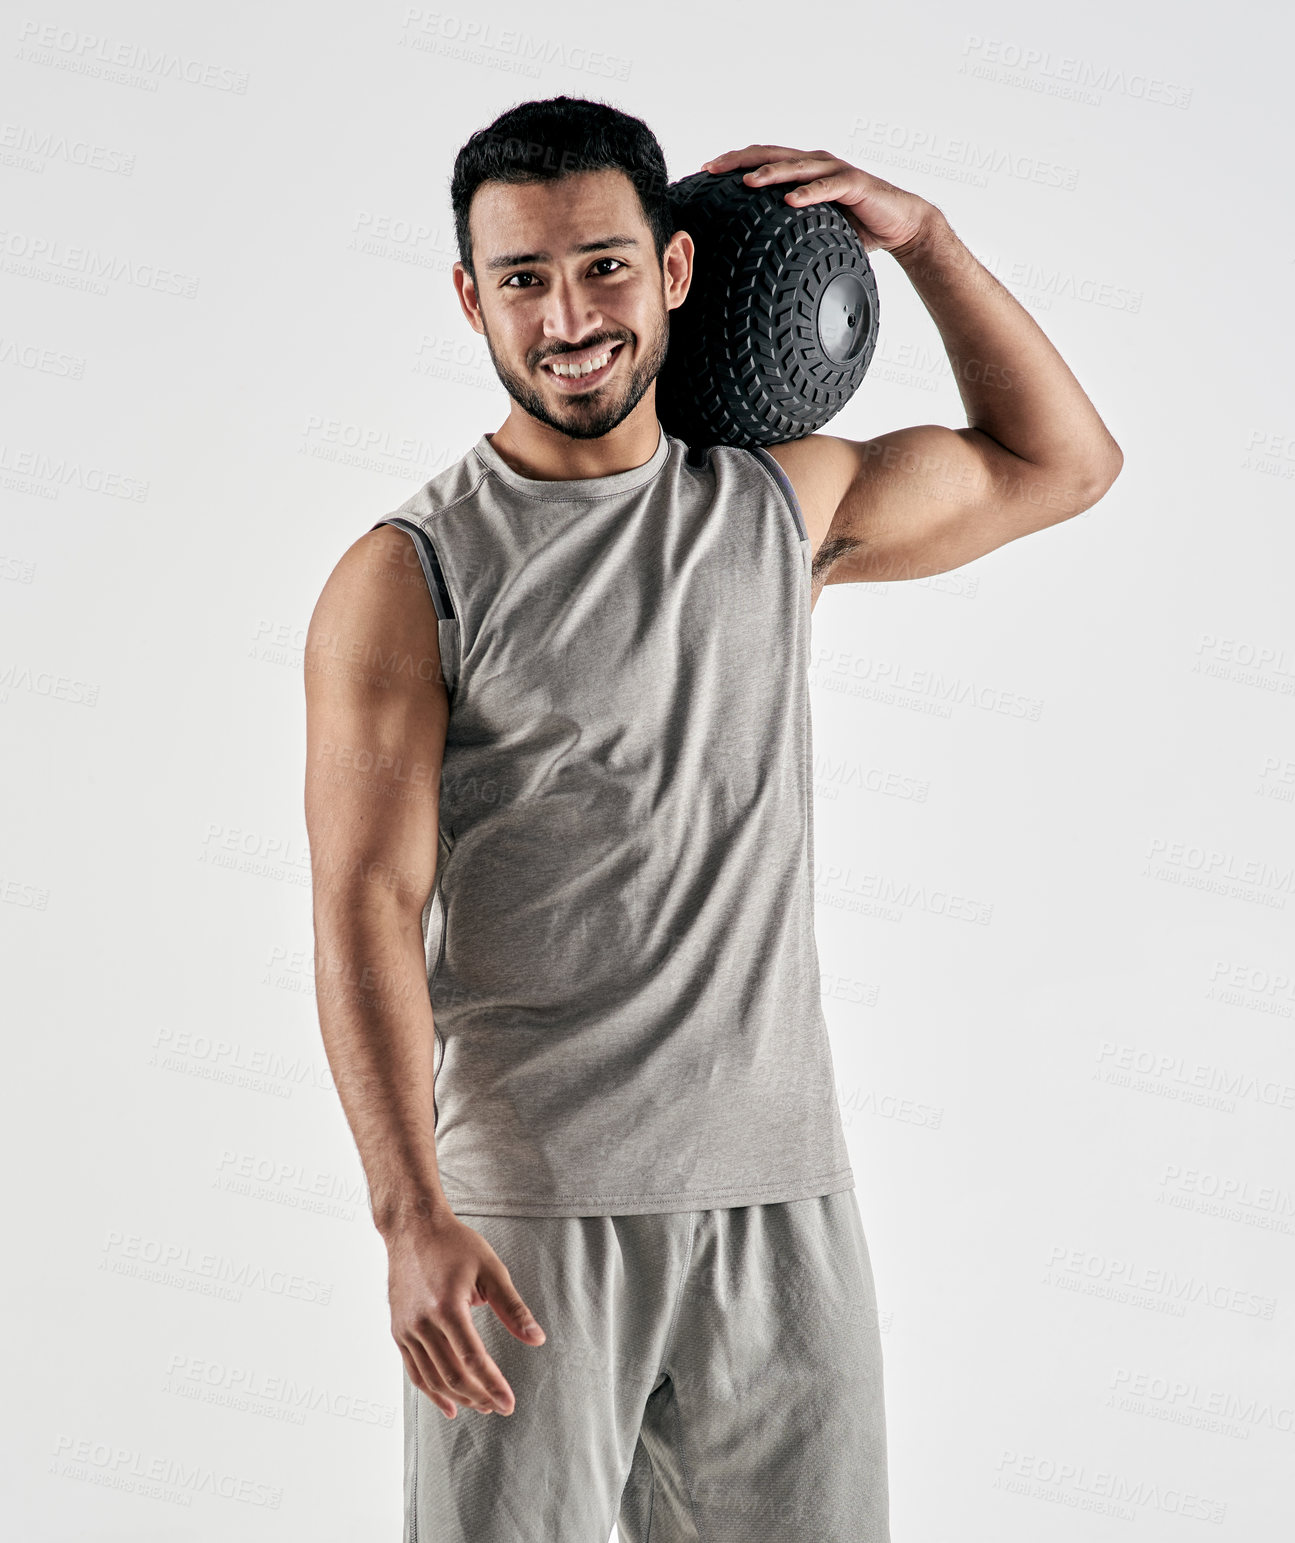 Buy stock photo Studio portrait of a muscular young man holding an exercise ball against a white background